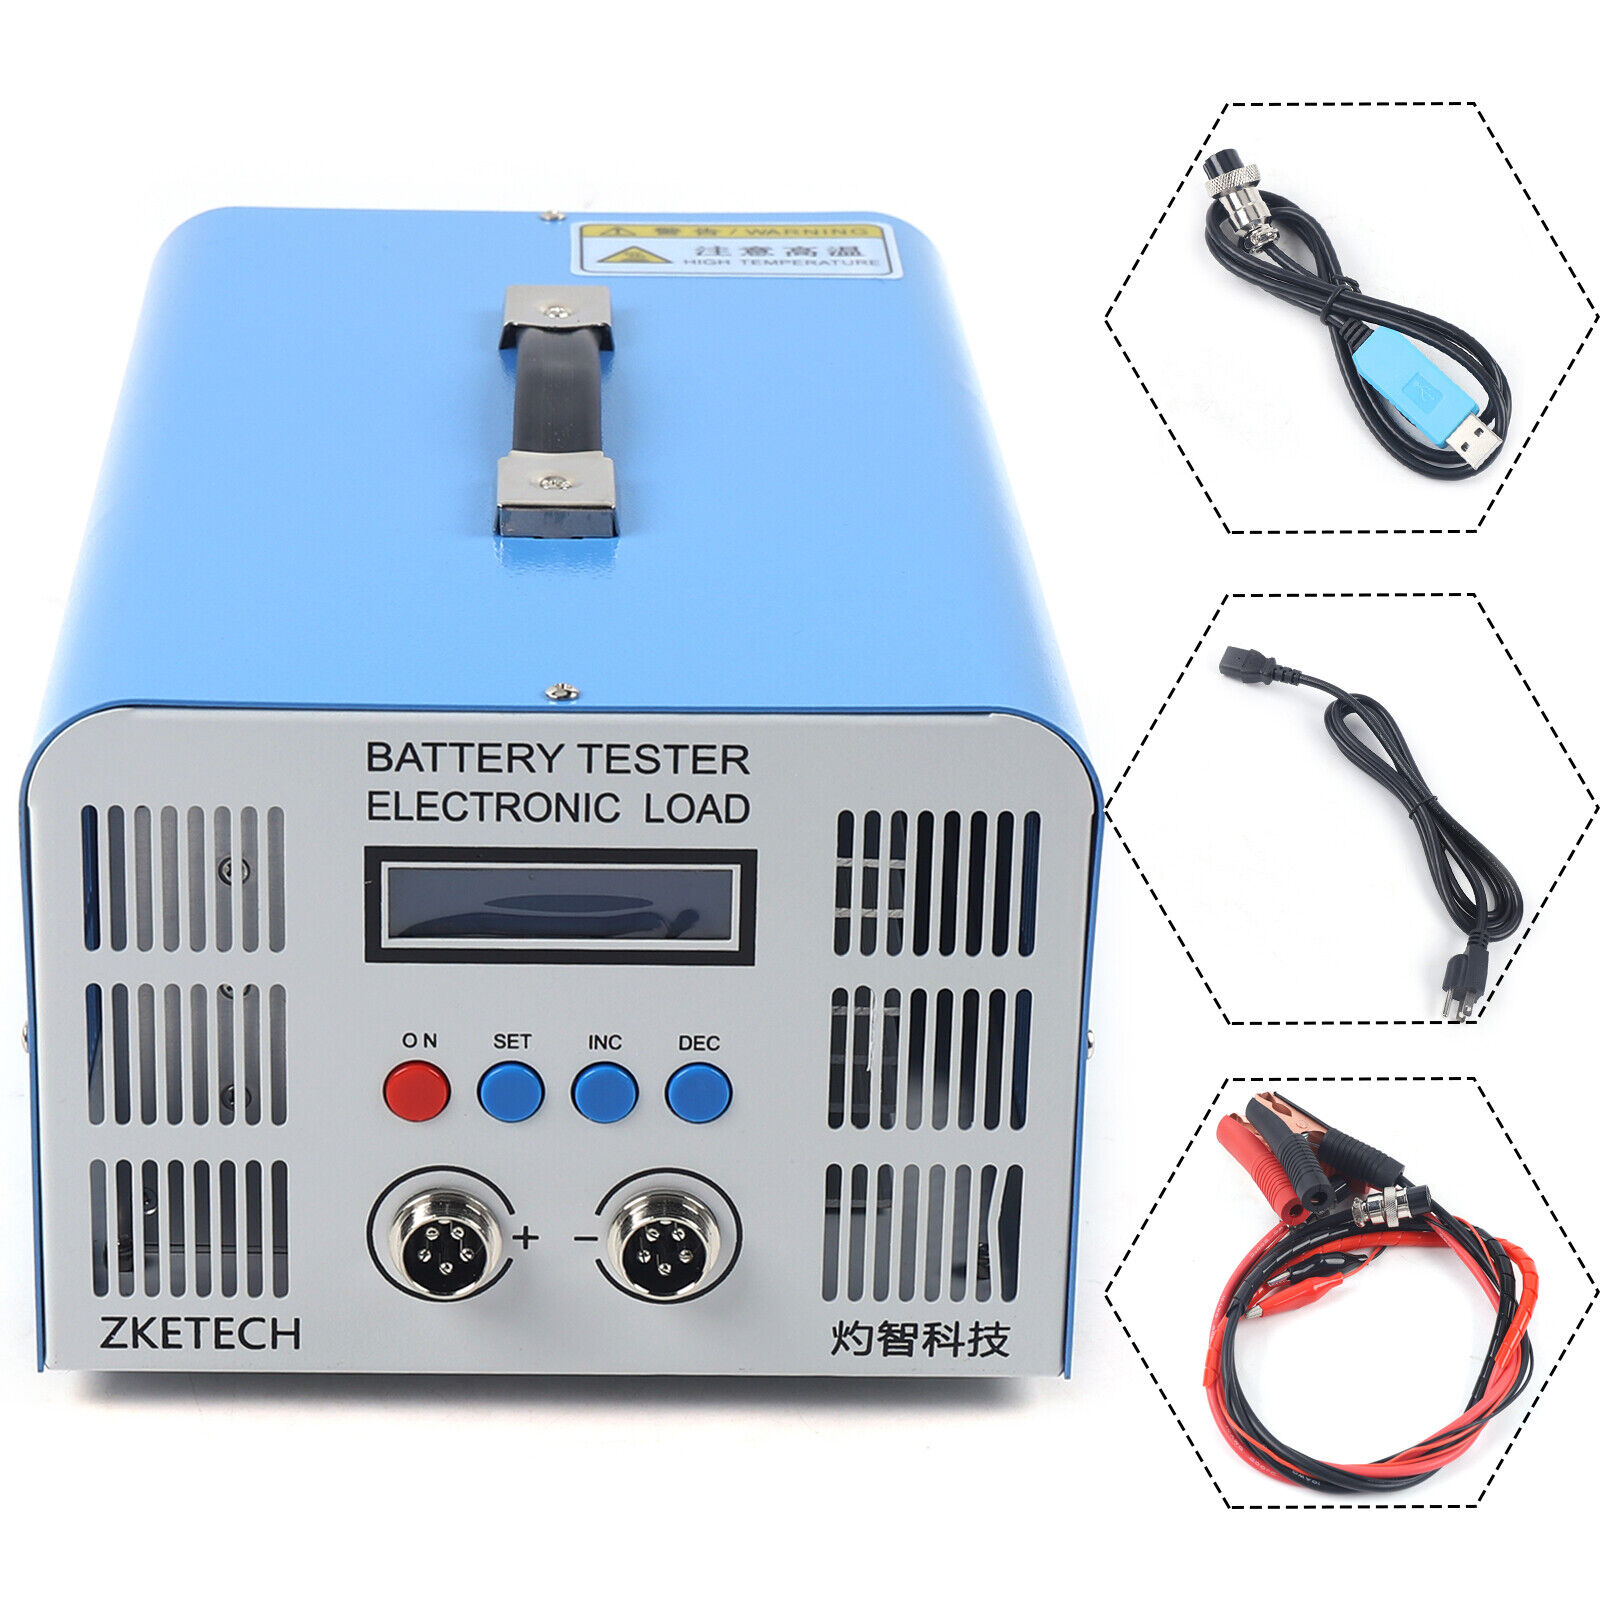 EBC-A40L 5V High Current Lithium Battery Capacity Tester 40A Charge & Discharge Unbranded Does Not Apply